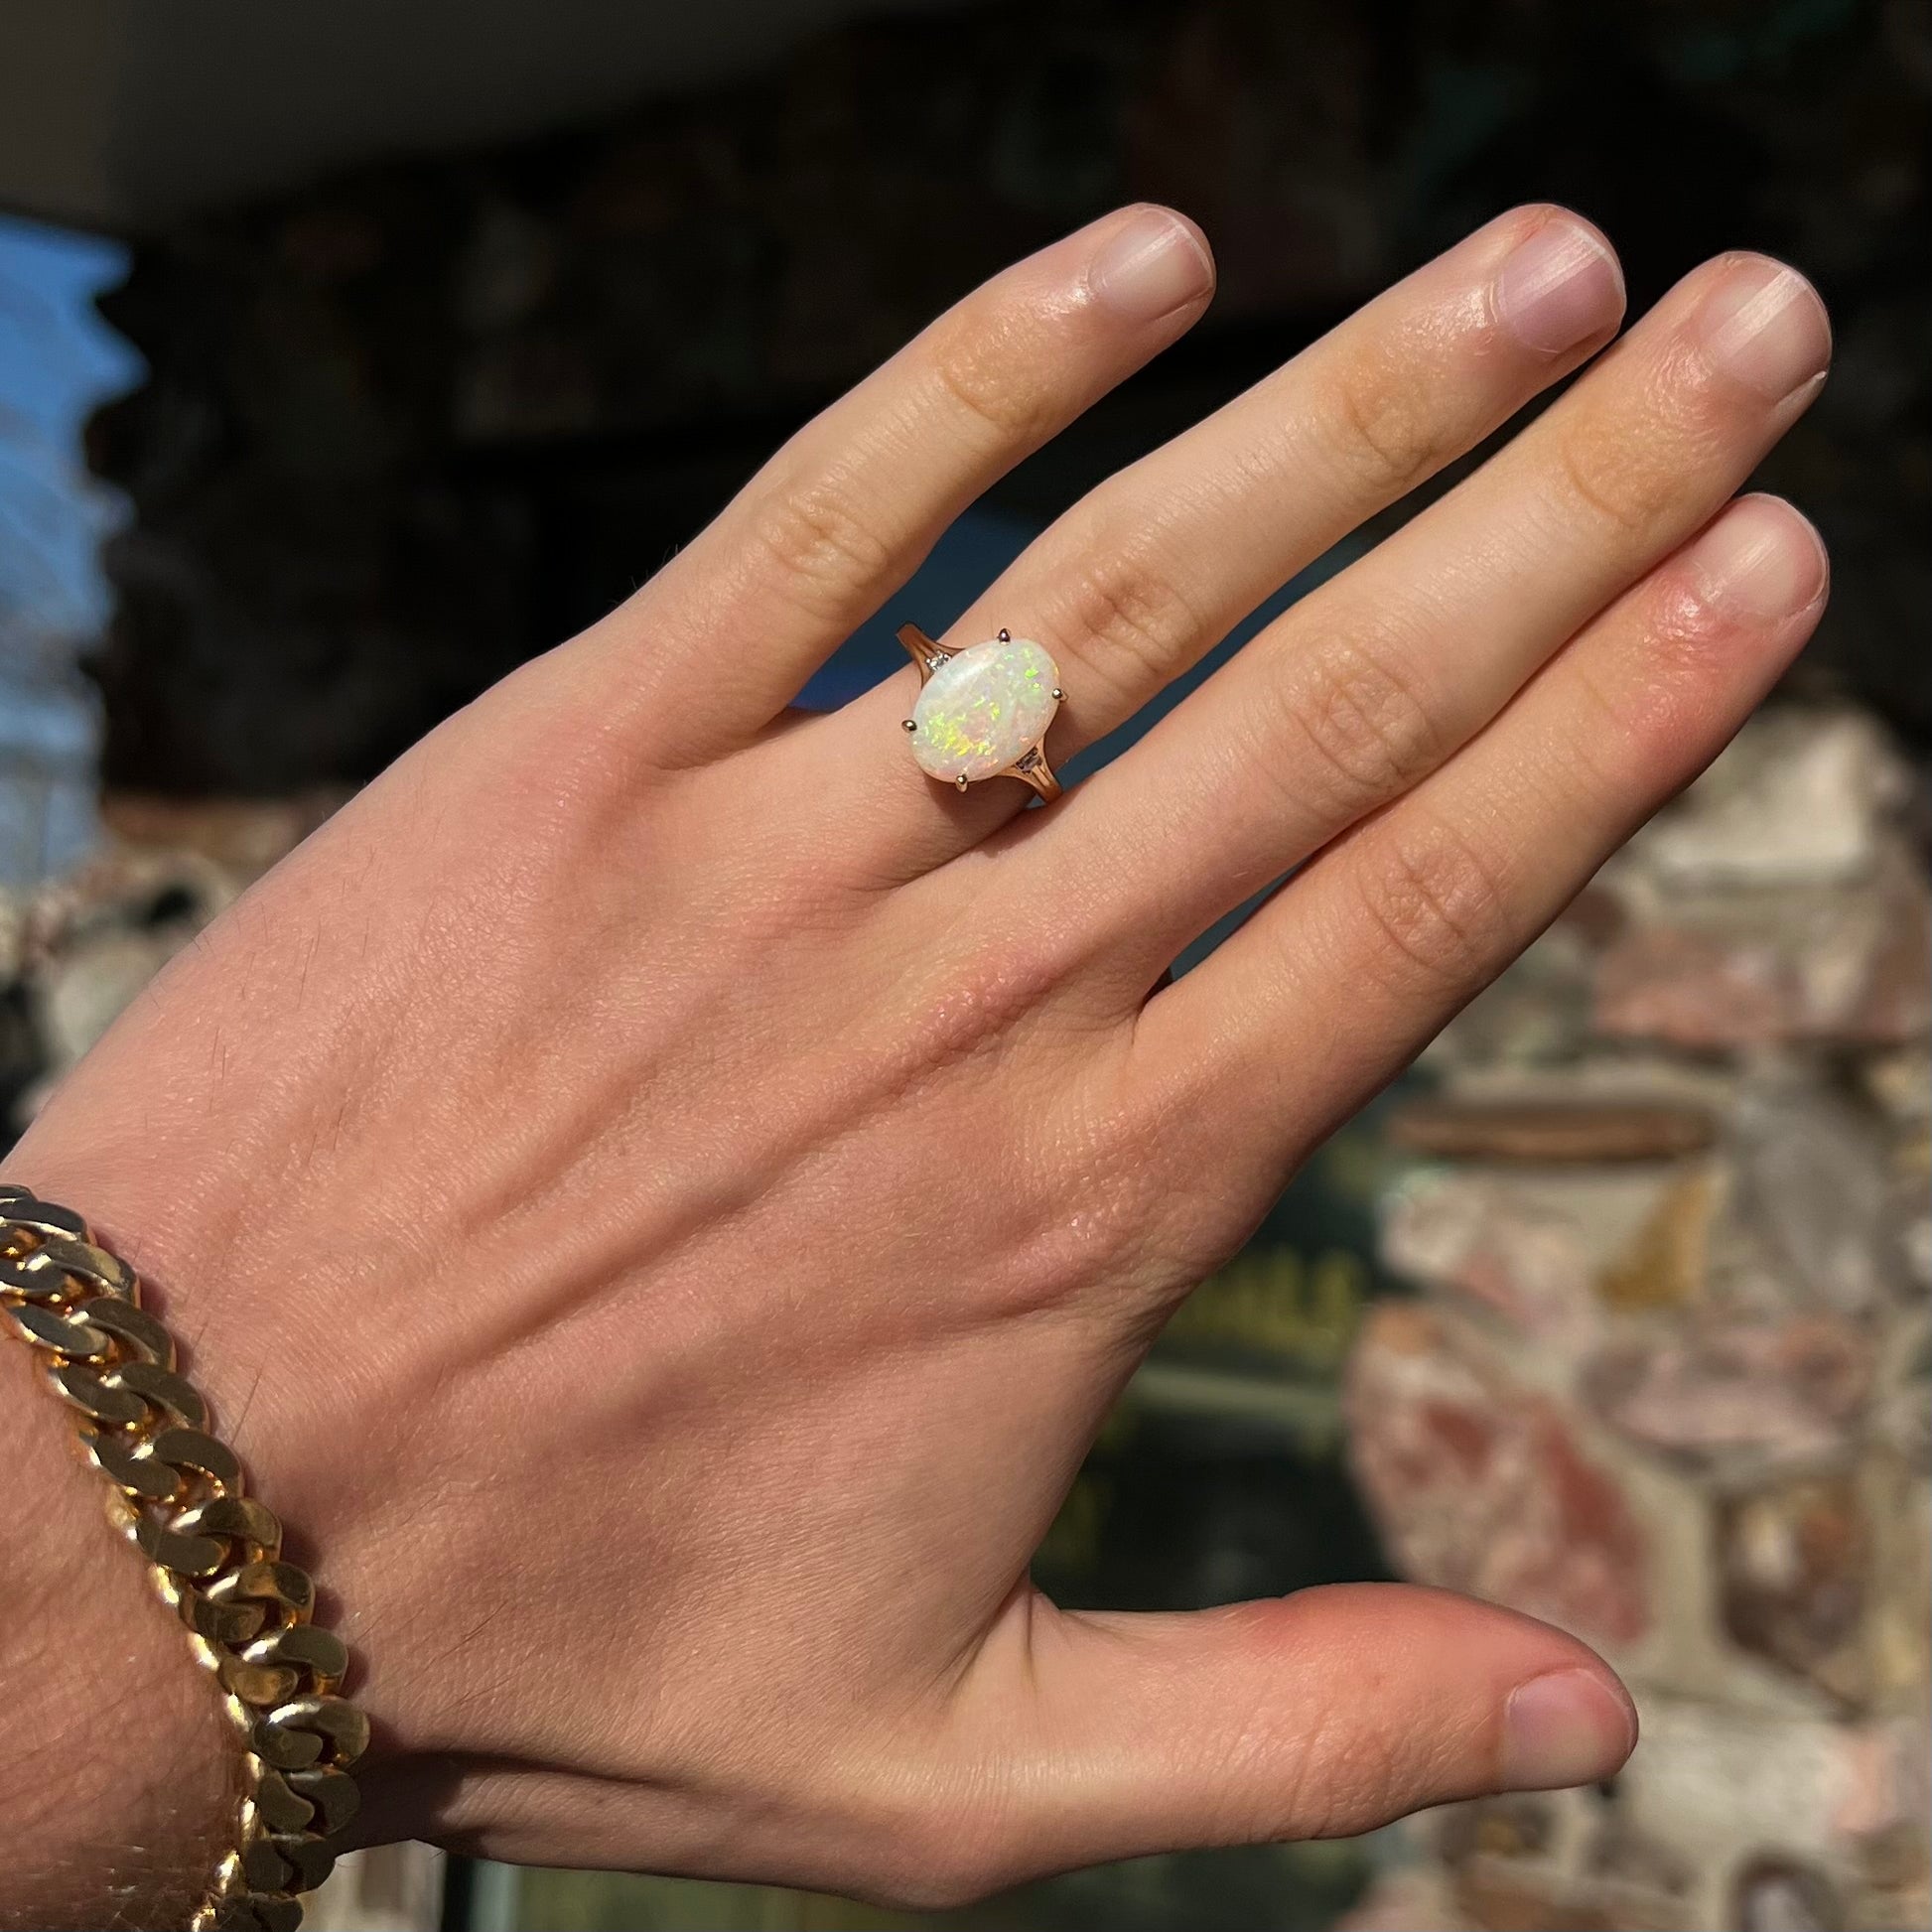 A ladies' yellow gold ring set with two diamonds and an oval cut natural opal stone.